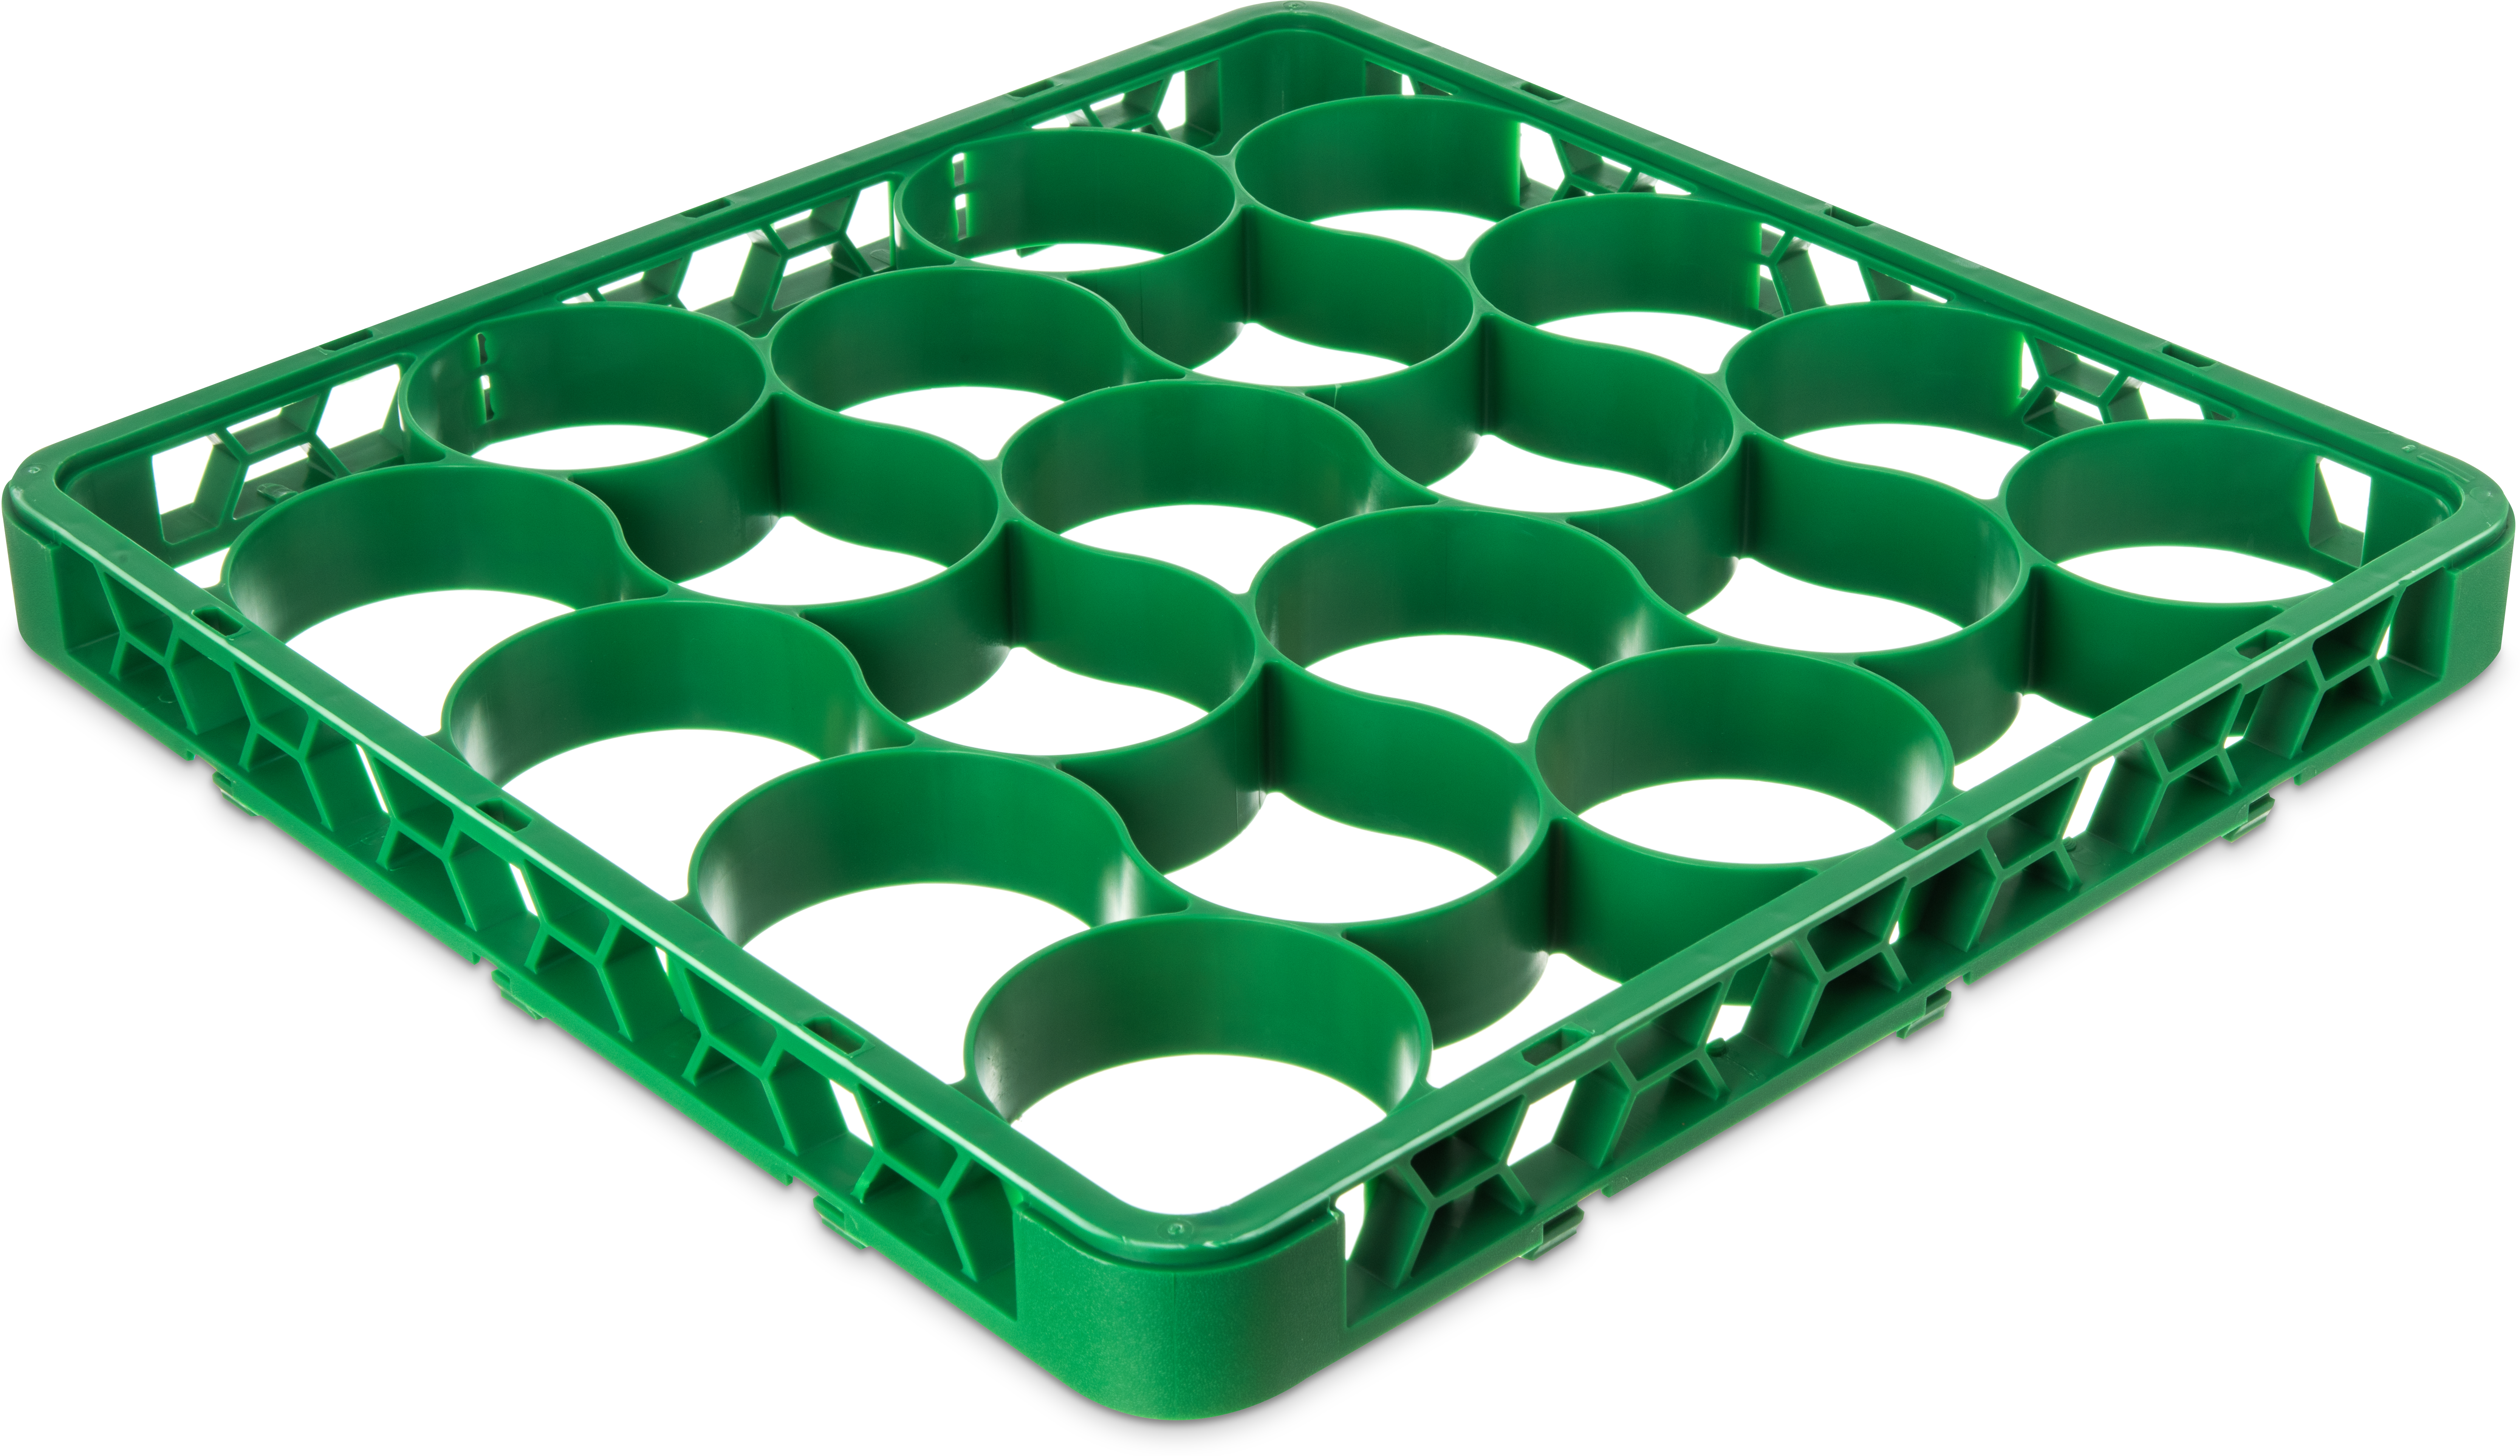 OptiClean NeWave Color-Coded Short Glass Rack Extender 20 Compartment - Green